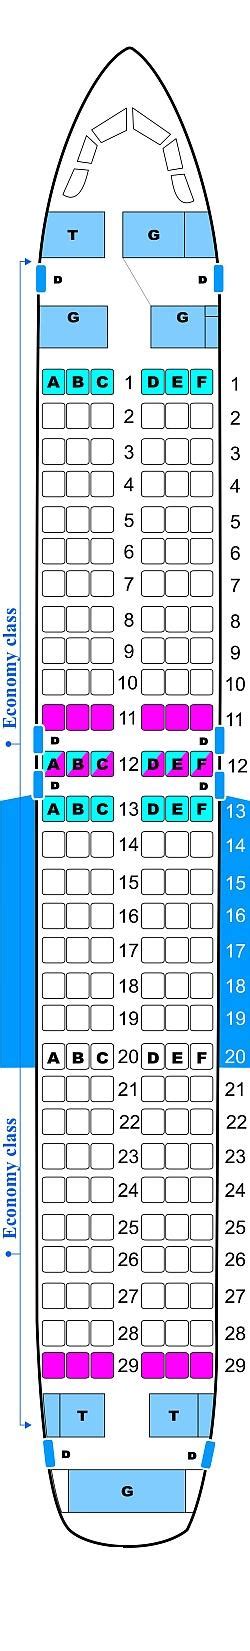 Airbus A320 Aircraft Seat Maps Specs And Amenities Images And Photos